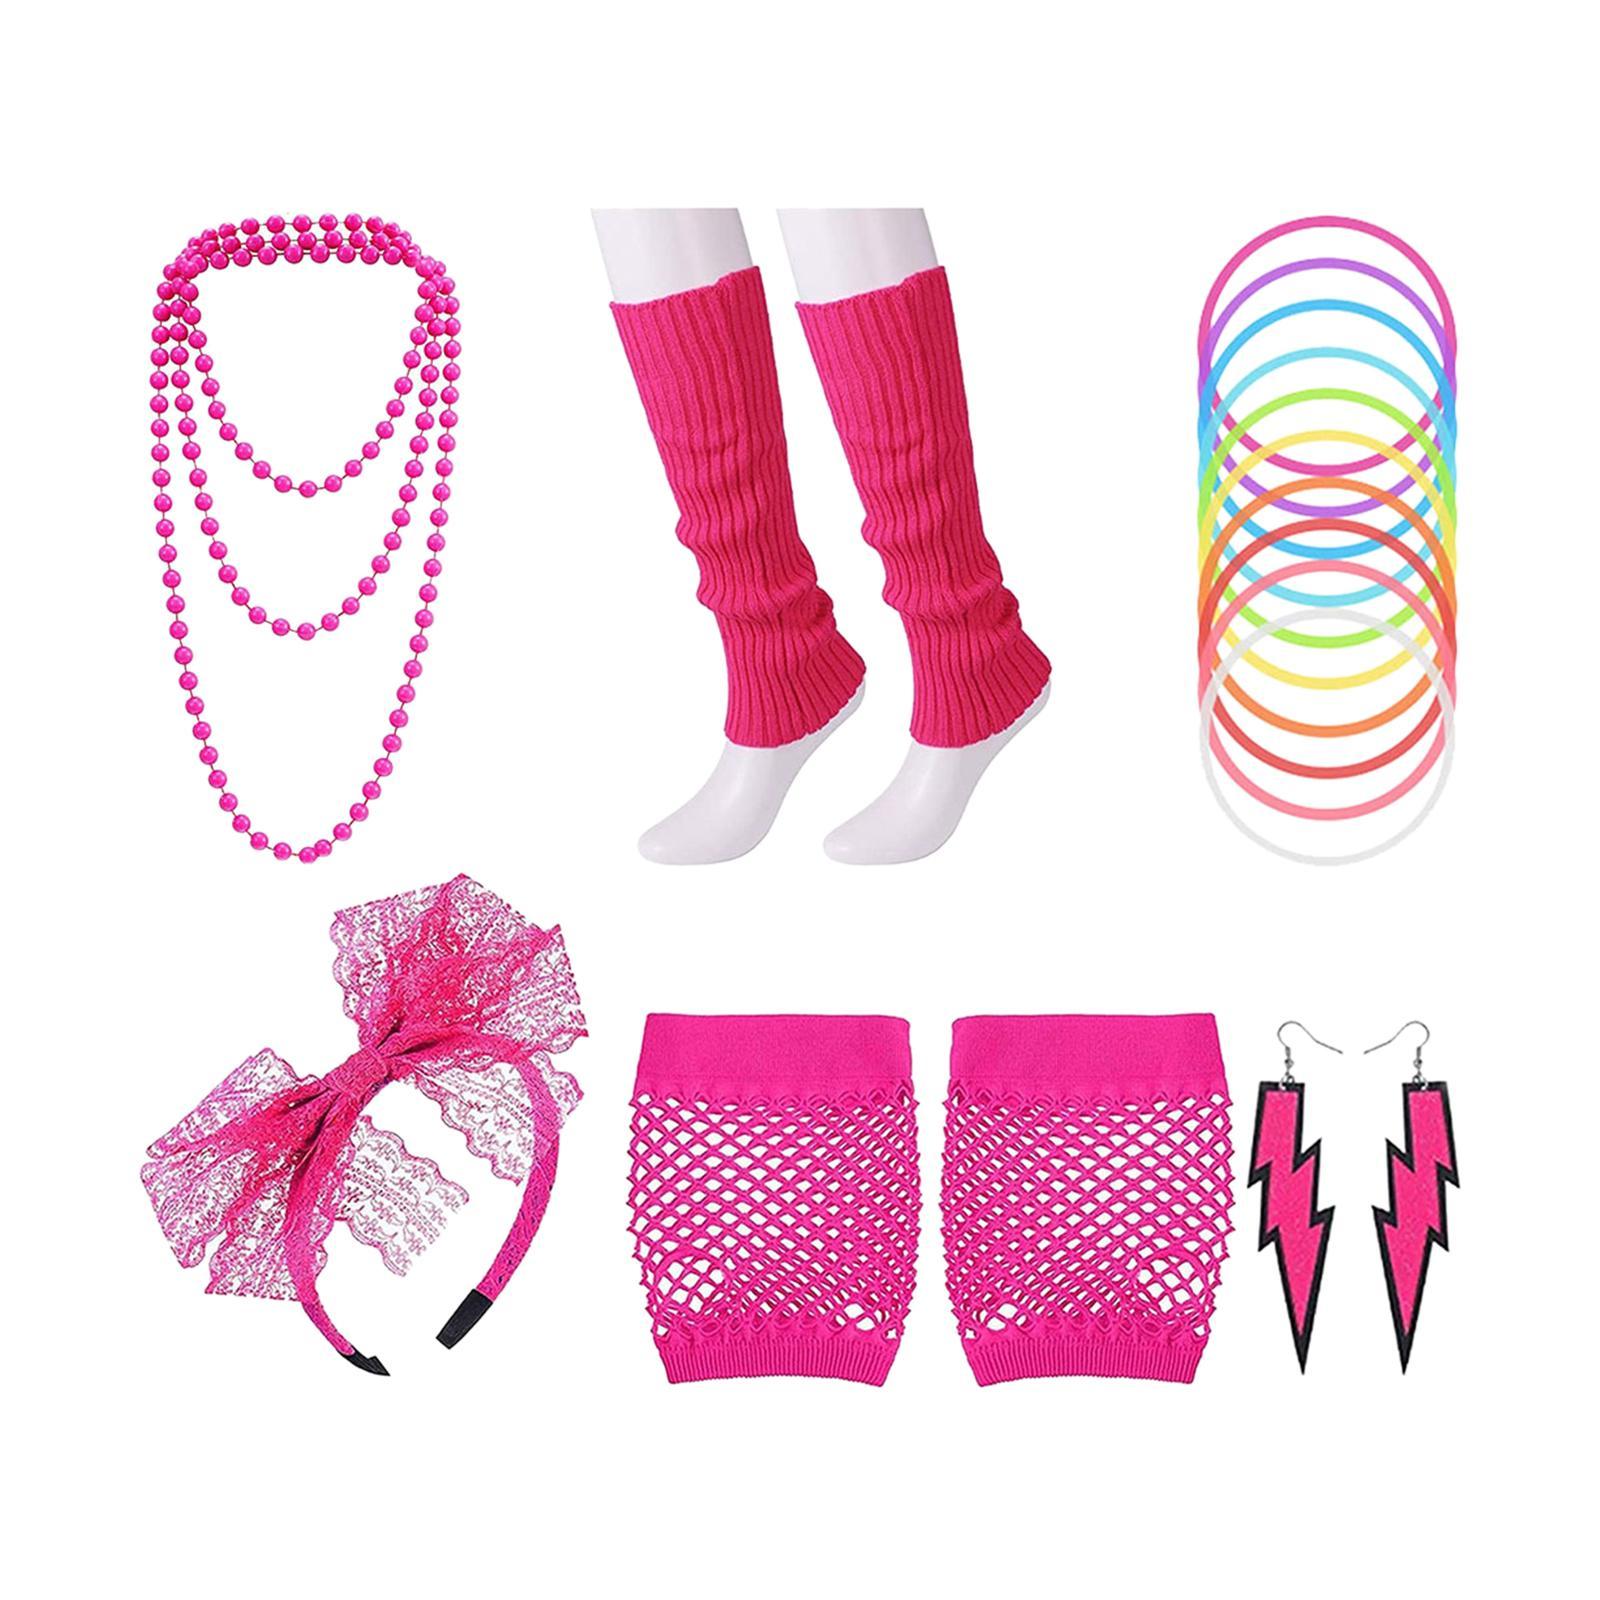 Costume Outfit Accessories Set Headband Beads Necklace Leg Warmers for Halloween